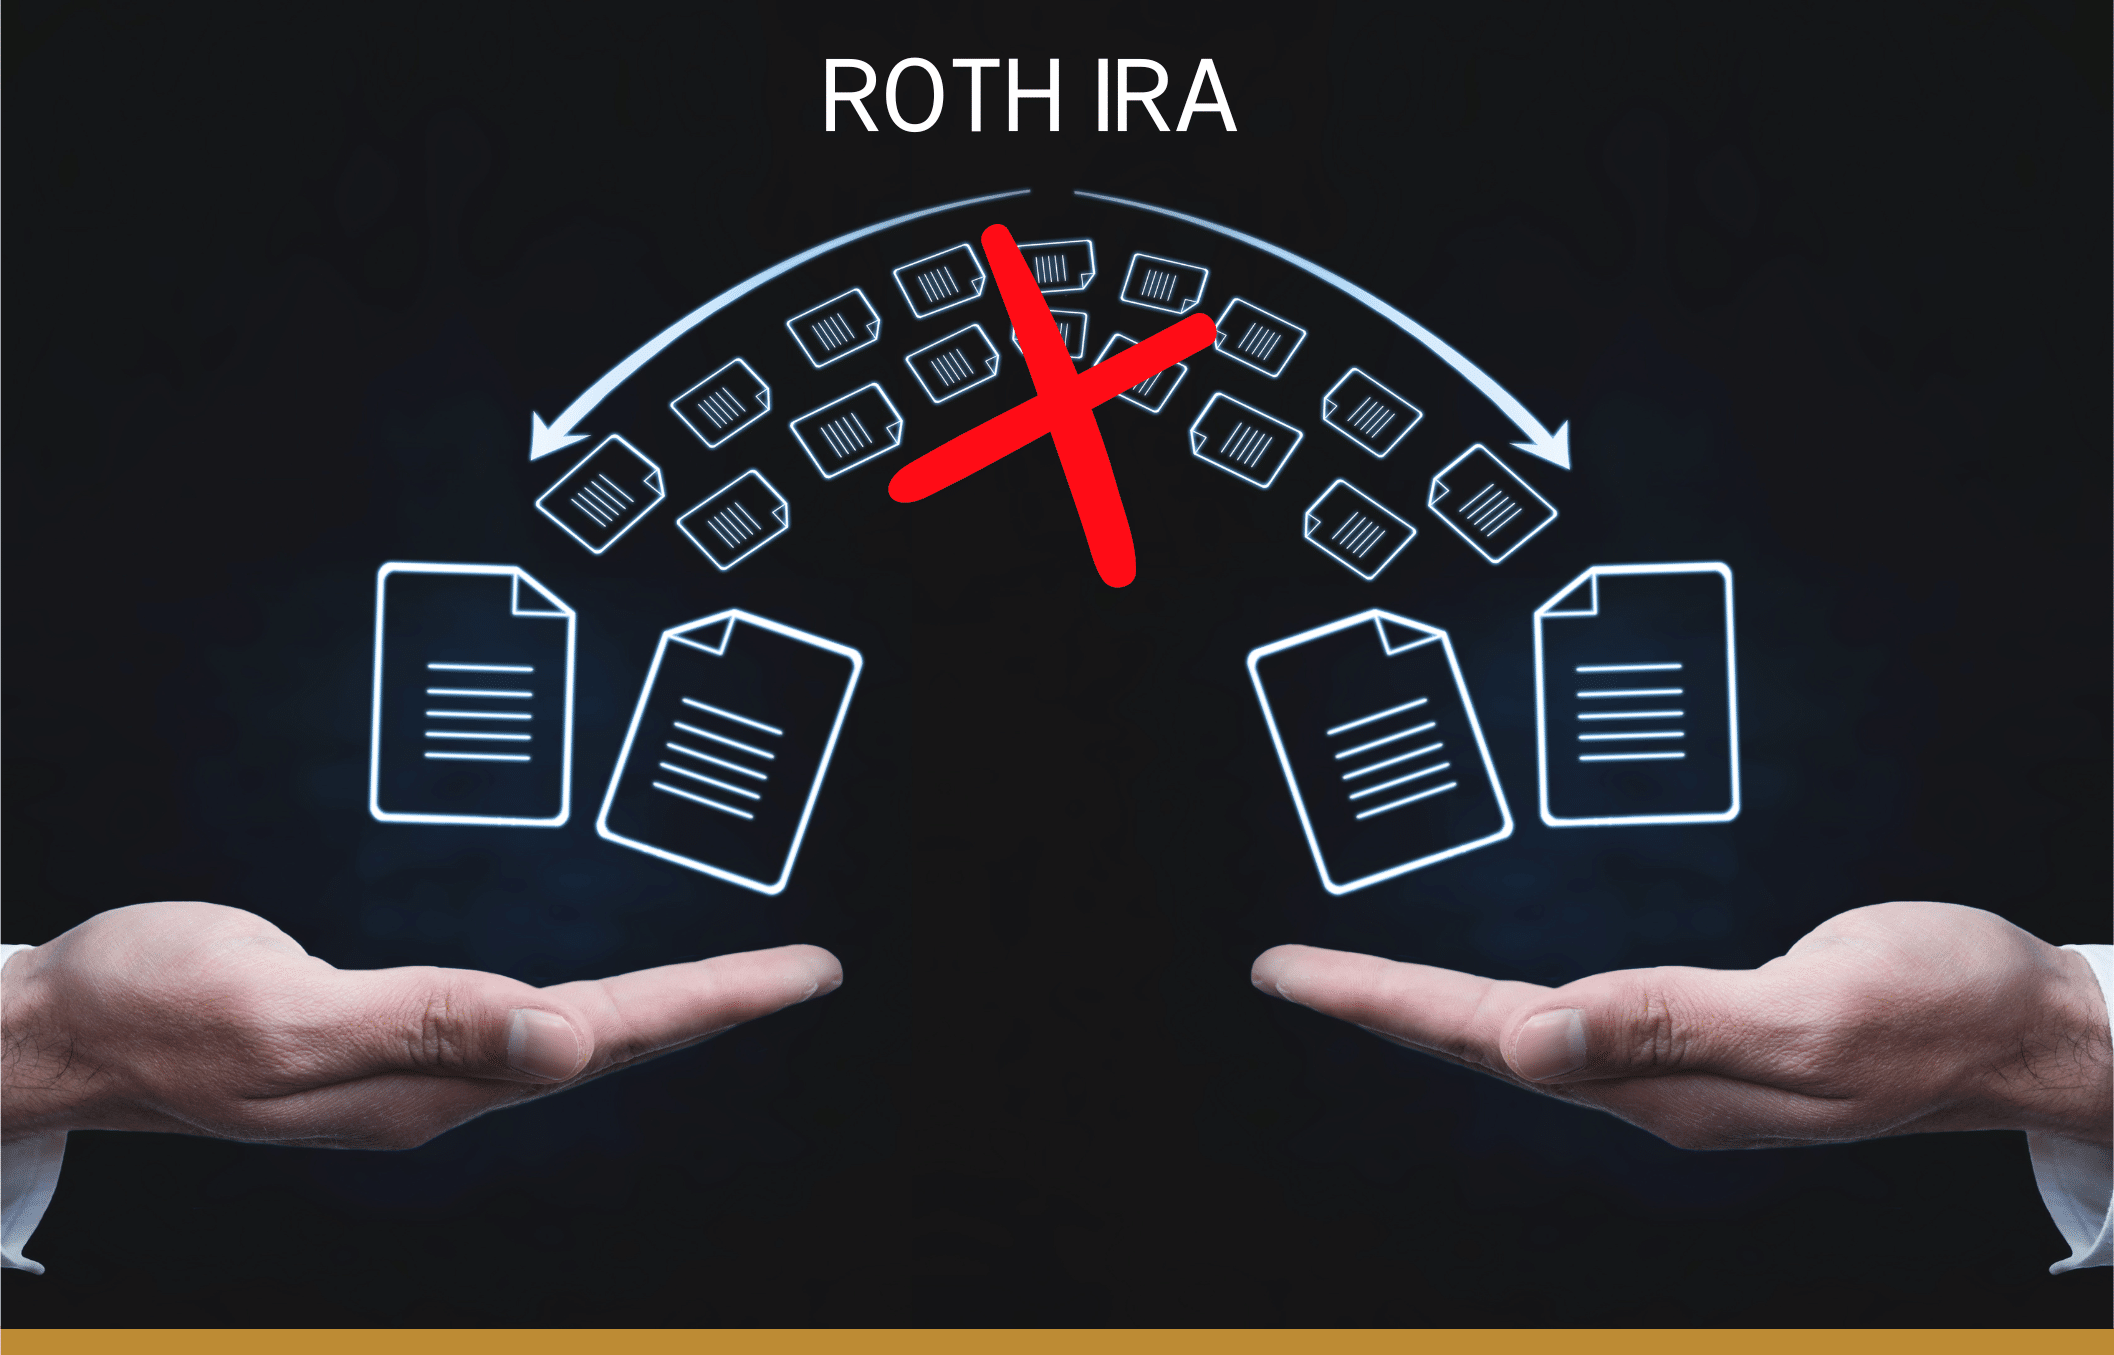 Roth IRA no longer ideal wealth transfer vehicle